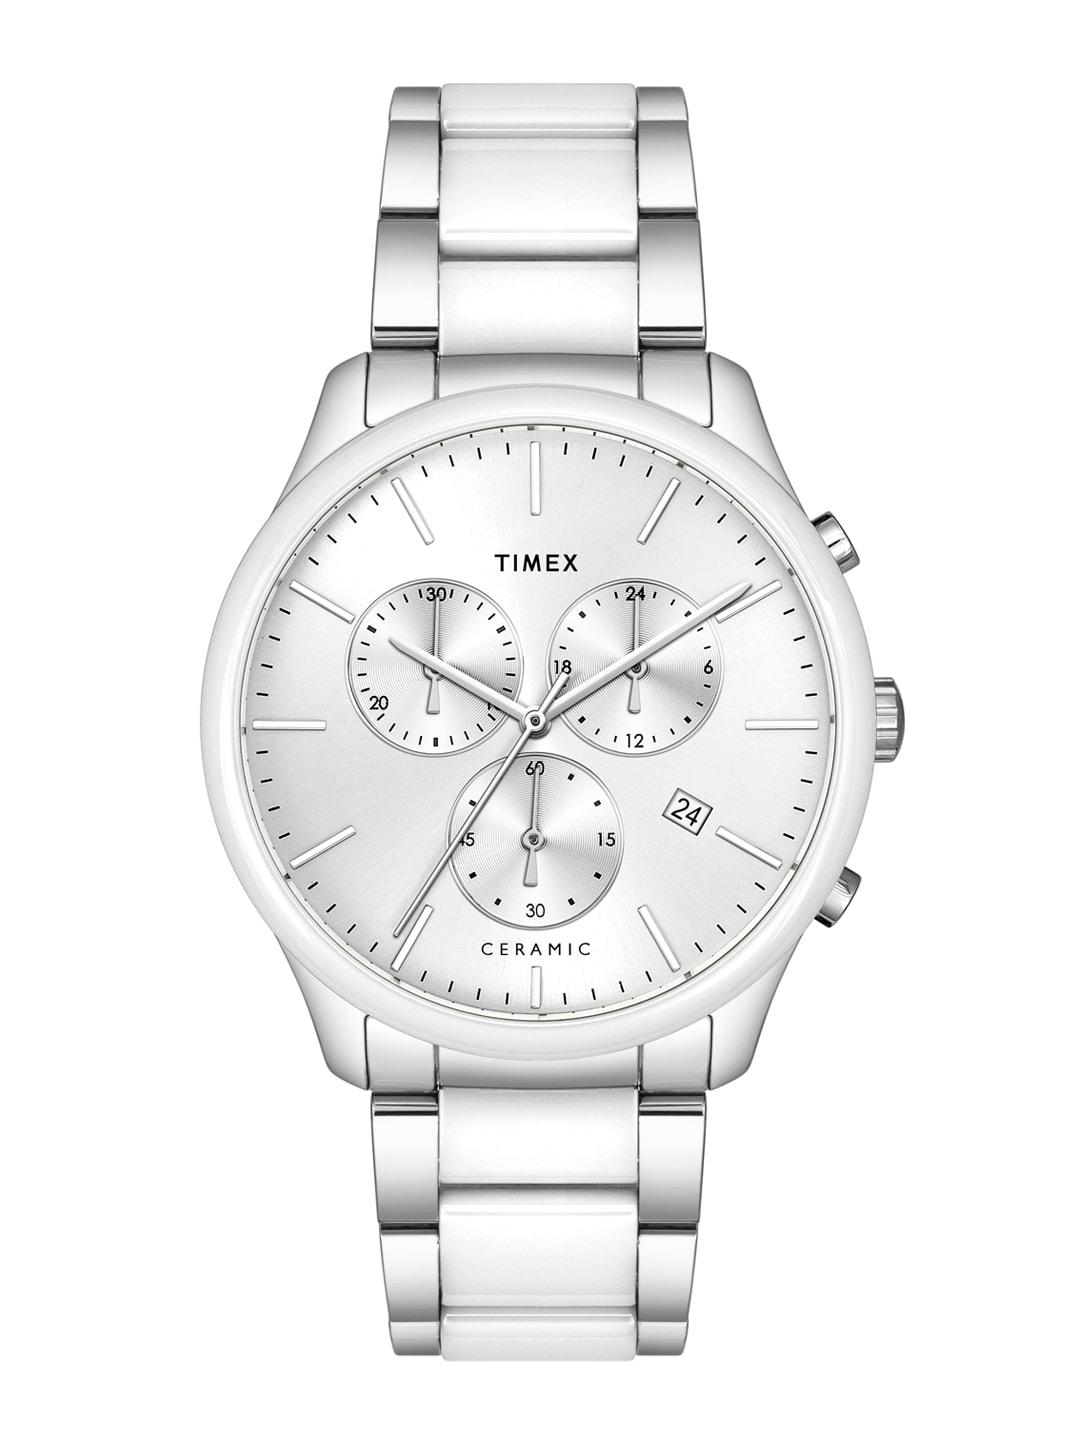 timex-men-silver-toned-patterned-dial-&-silver-toned-stainless-steel-bracelet-style-straps-analogue-watch